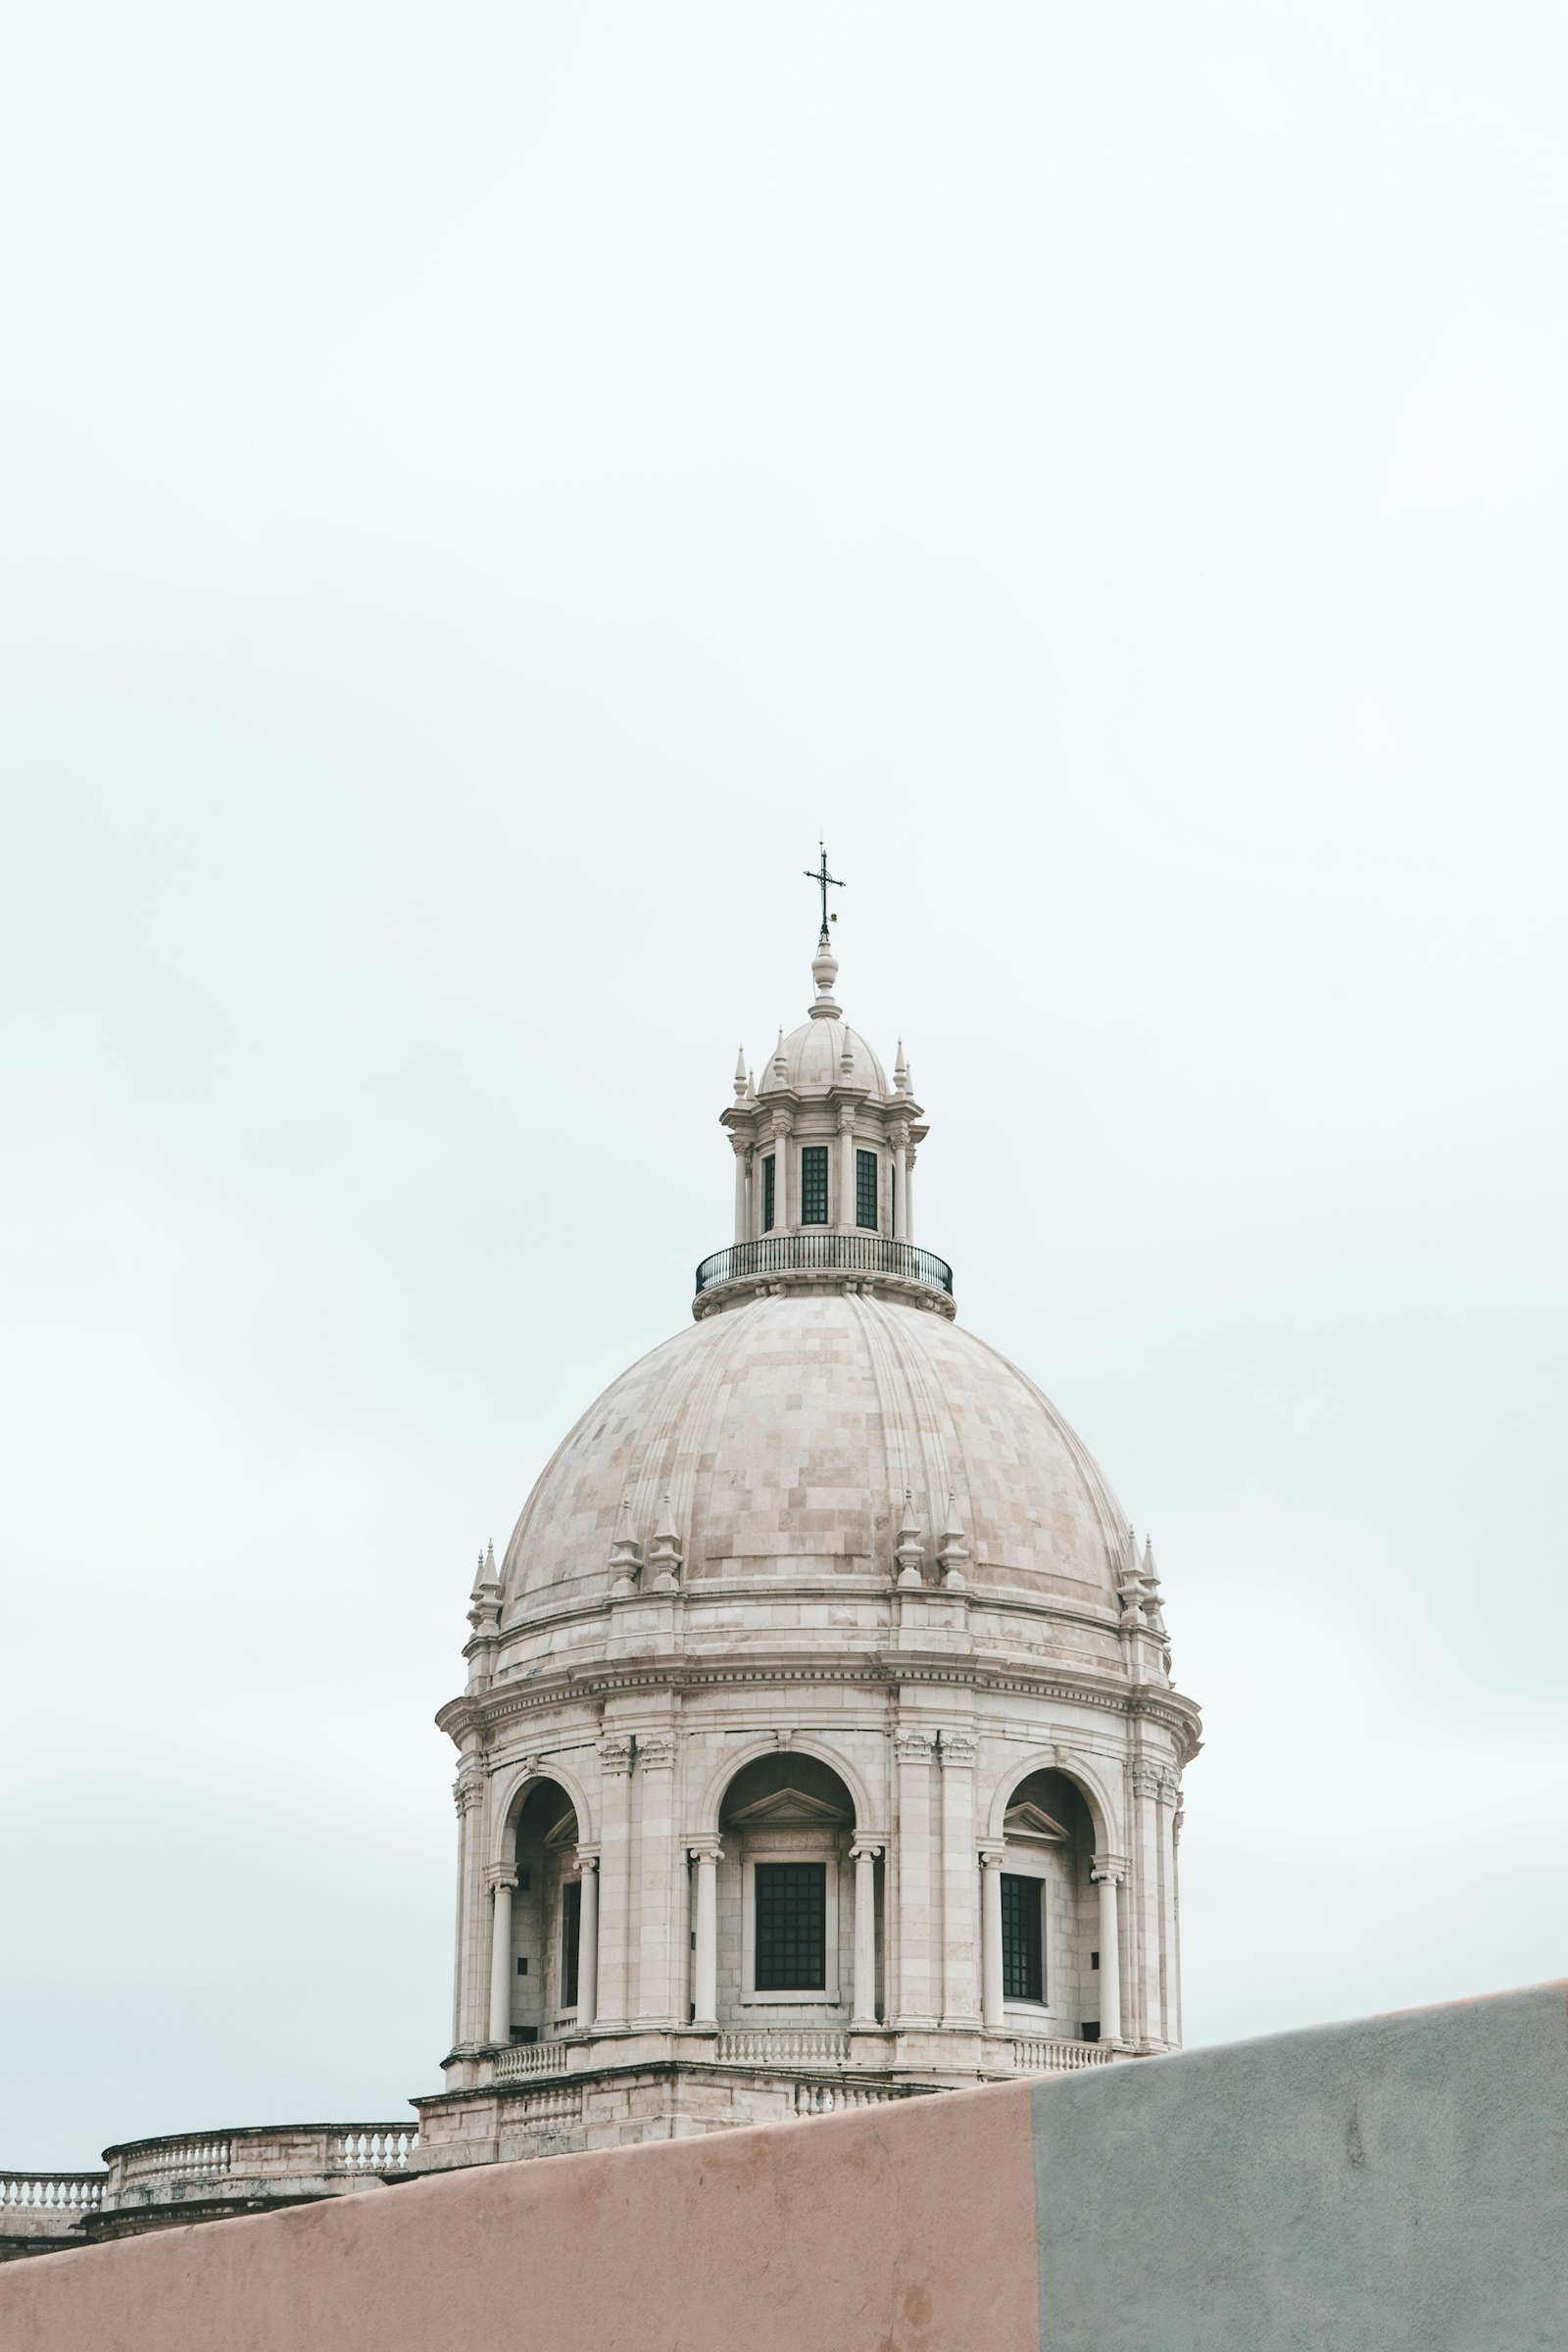 Sony a7 II sample photo. White dome church under photography